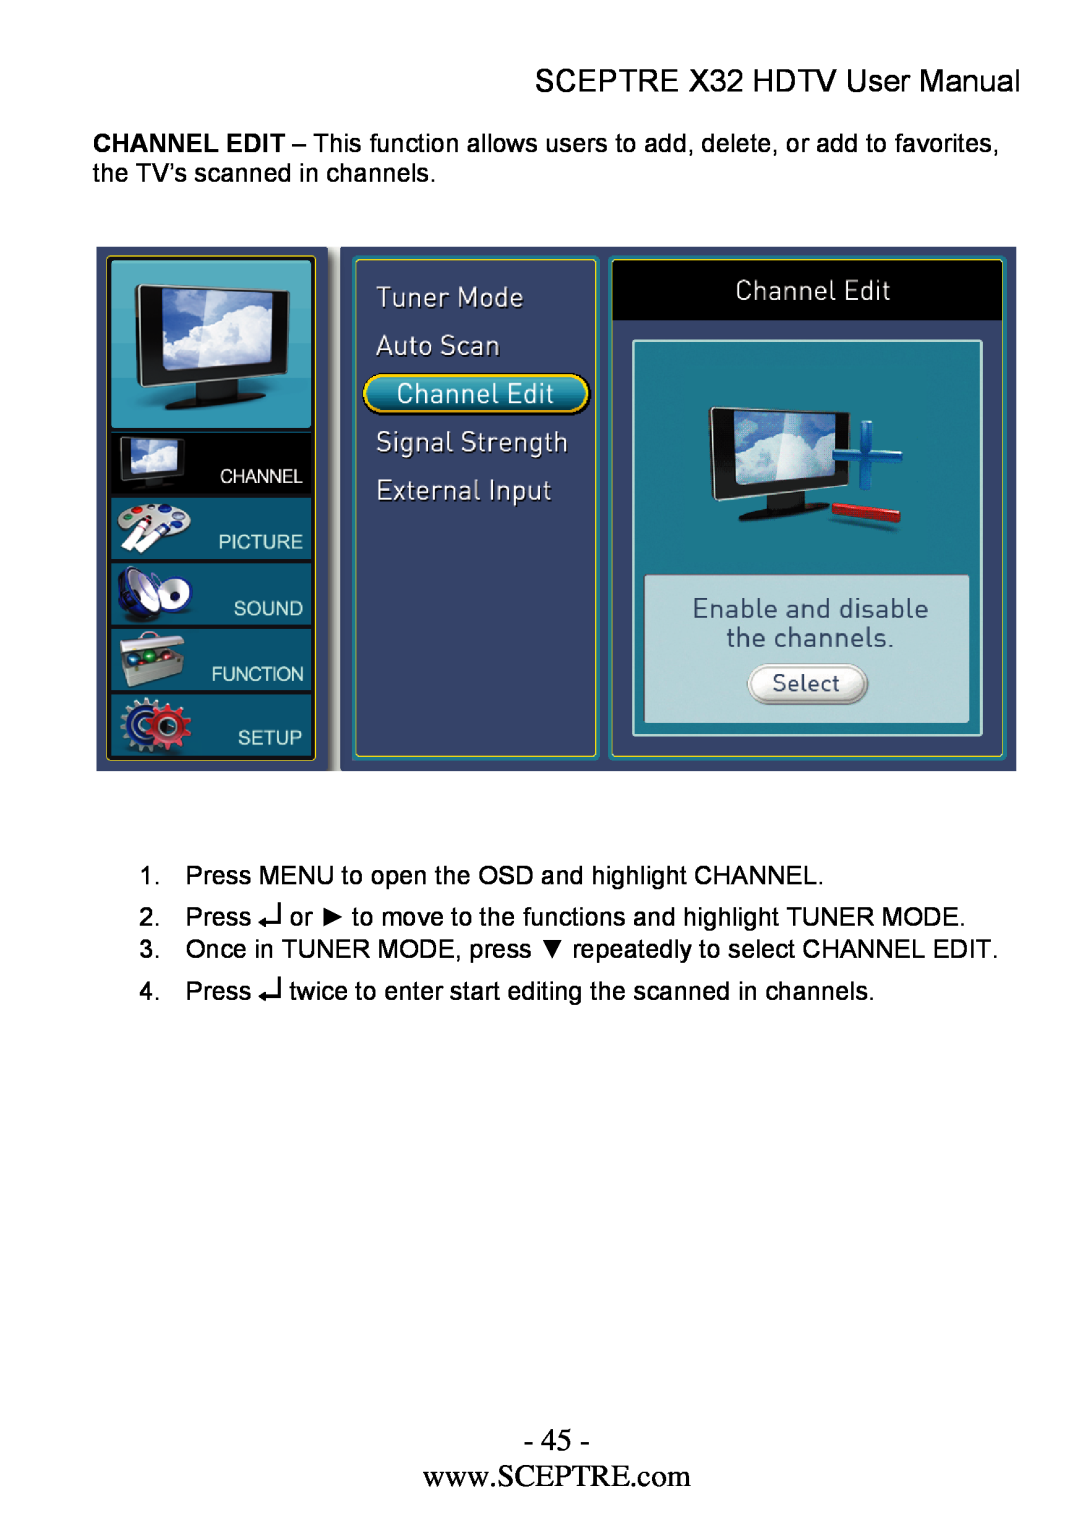 Sceptre Technologies x32 user manual SCEPTRE X32 HDTV User Manual, Press MENU to open the OSD and highlight CHANNEL 